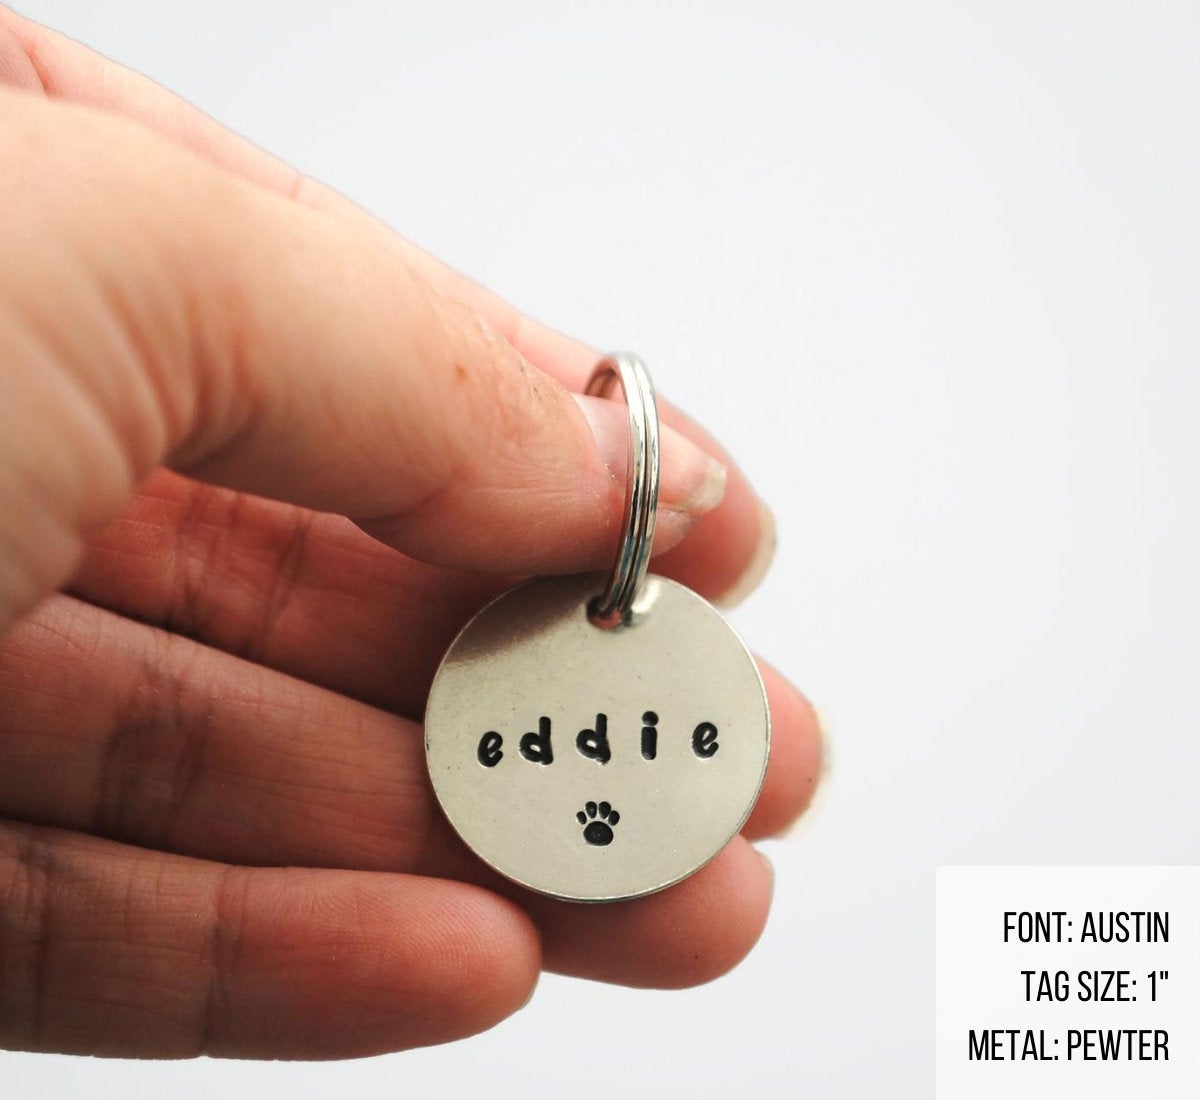 Paw Print Personalized Dog Tag - Cat ID Tag - Dog Collar Tag - Custom Dog Tag - Personalized Tag - Pet ID Tag - Pet Name Tag - Customized Dog Tag - Customized Cat Tag - Minimalist - Pet name on front with a paw print design. Your phone number will be on the back.